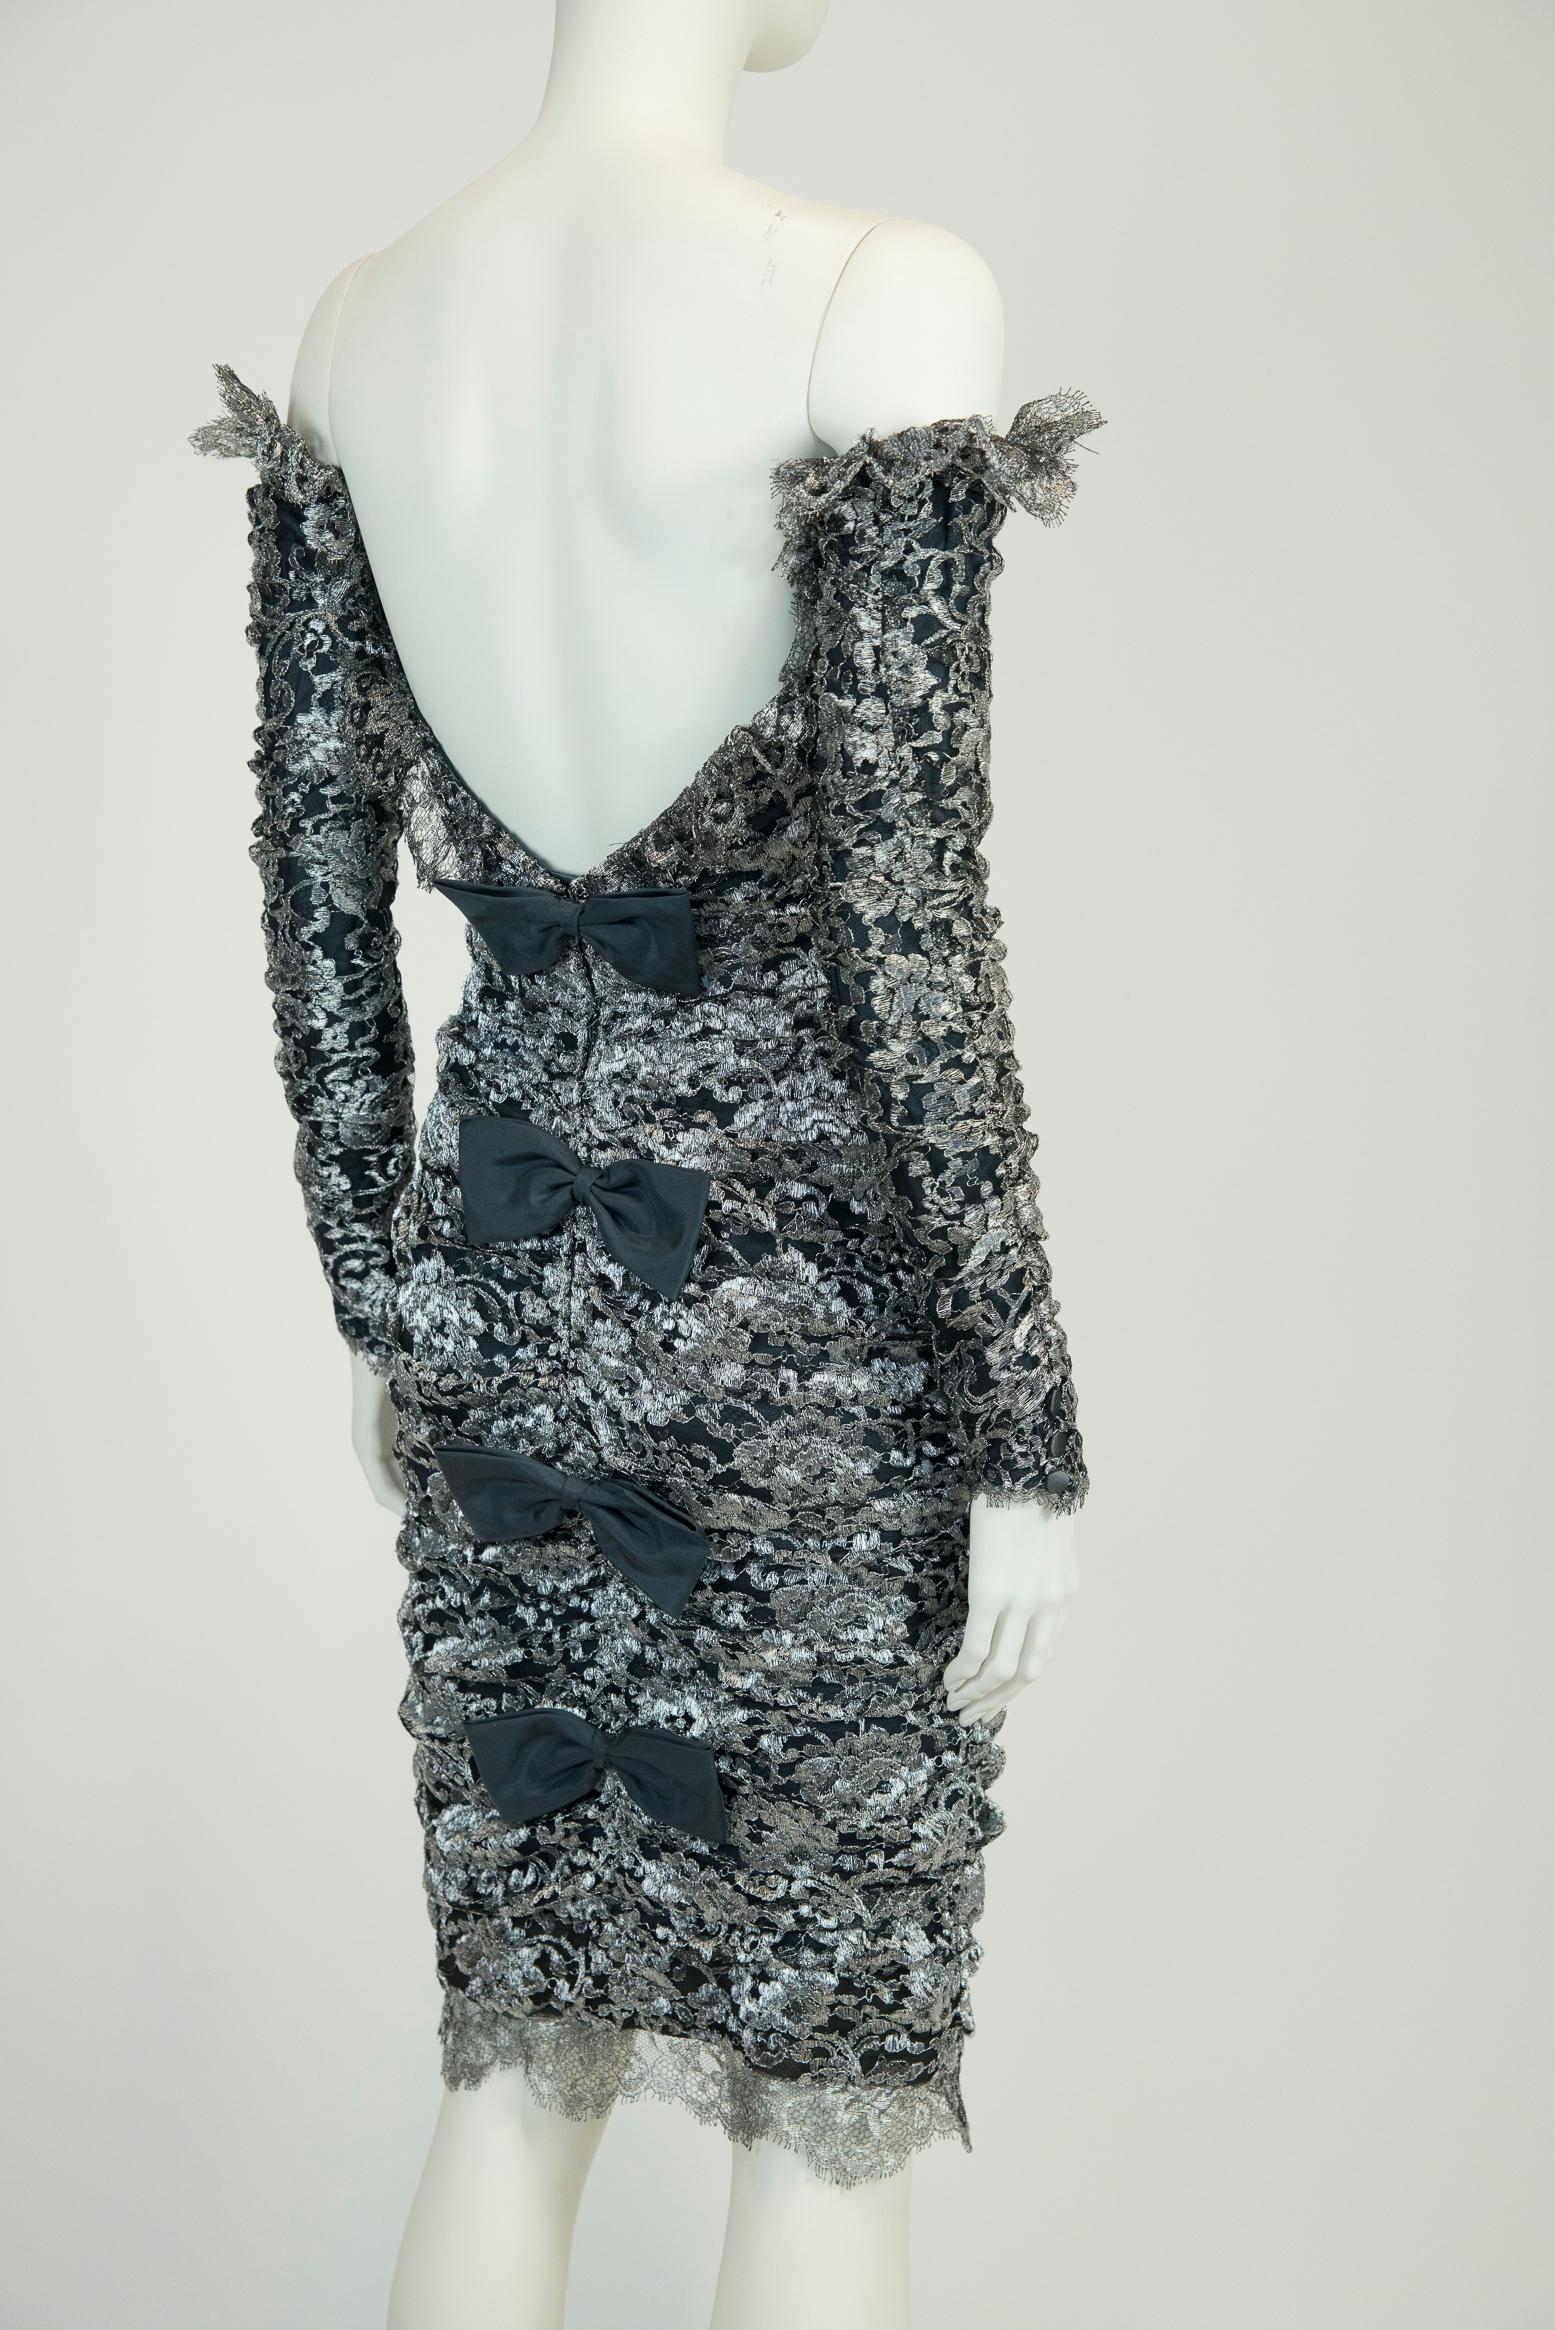 By the French designer Isabelle Allard, this 80's evening dress is sure to get you in the mood to party !
Made from metallic silver lace that's ruched throughout to emphasise the close fit and provide texture, the piece is entirely underpinned with